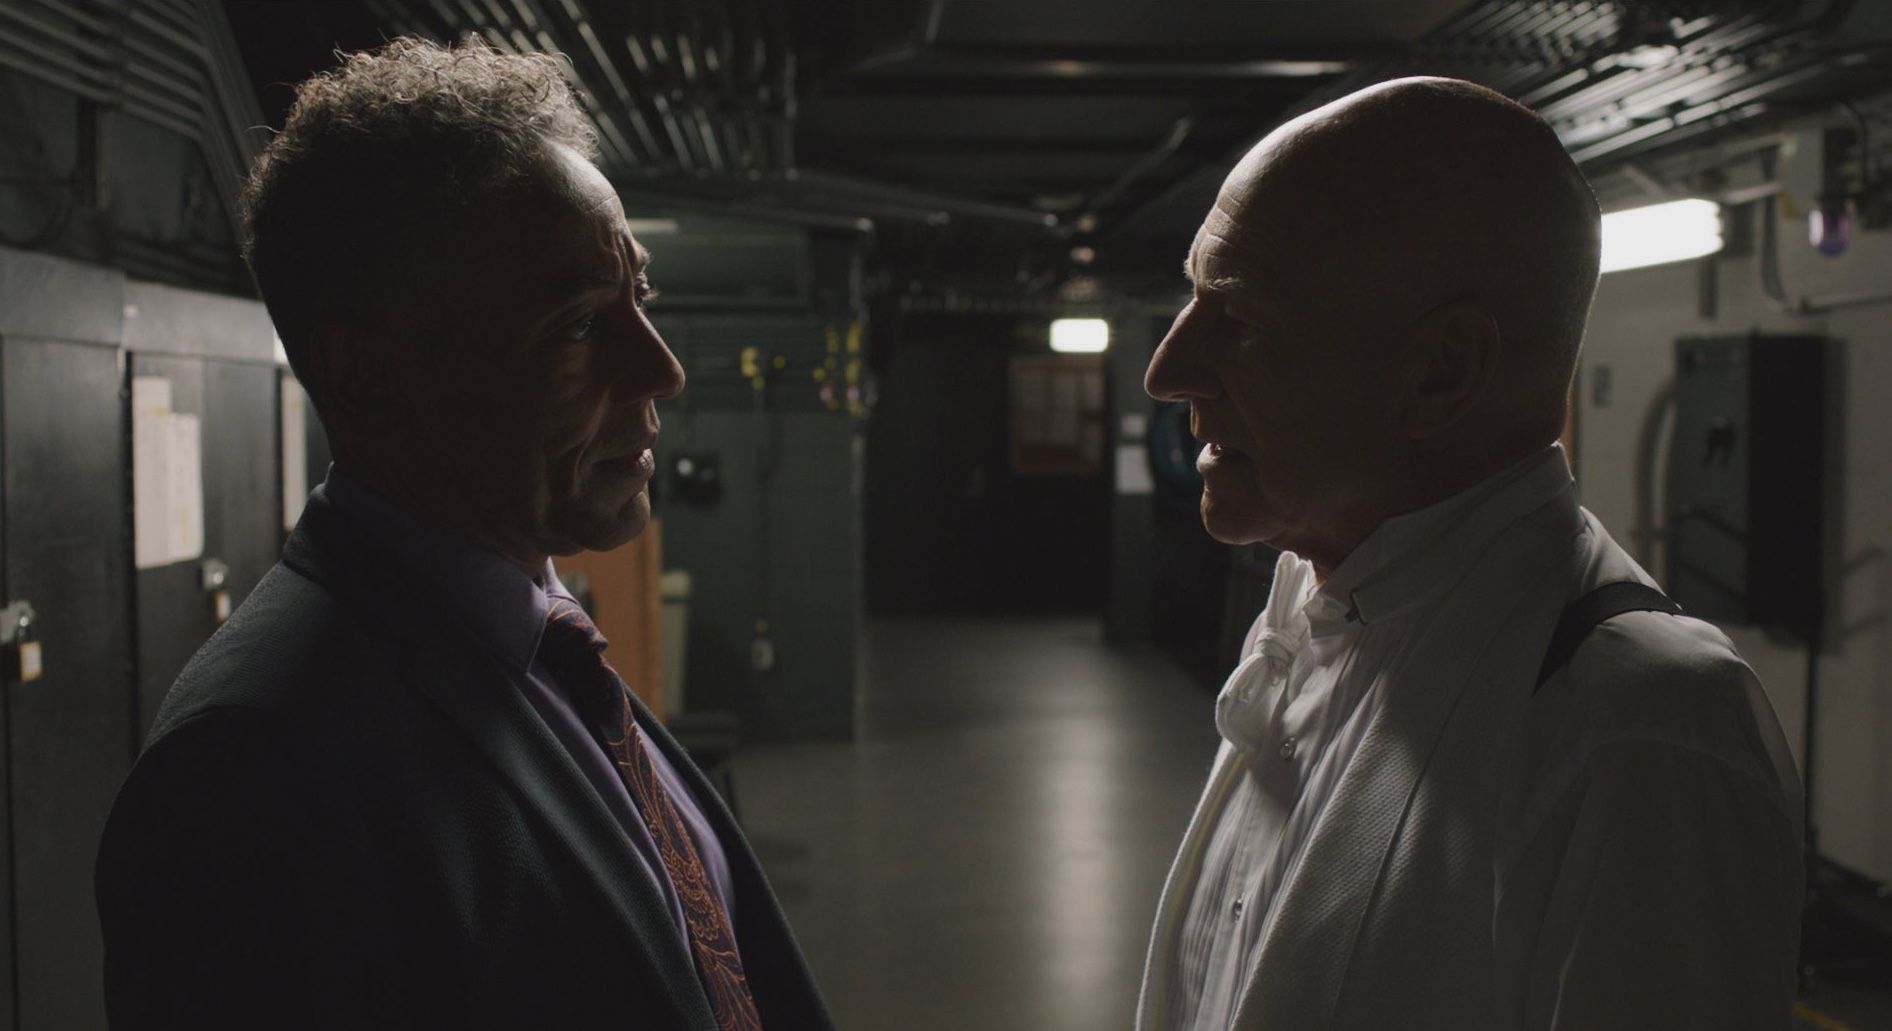 A traumatized old master's best friend: Esposito gives Stewart some tough love in "Coda" / Photo courtesy of Gravitas ventures.